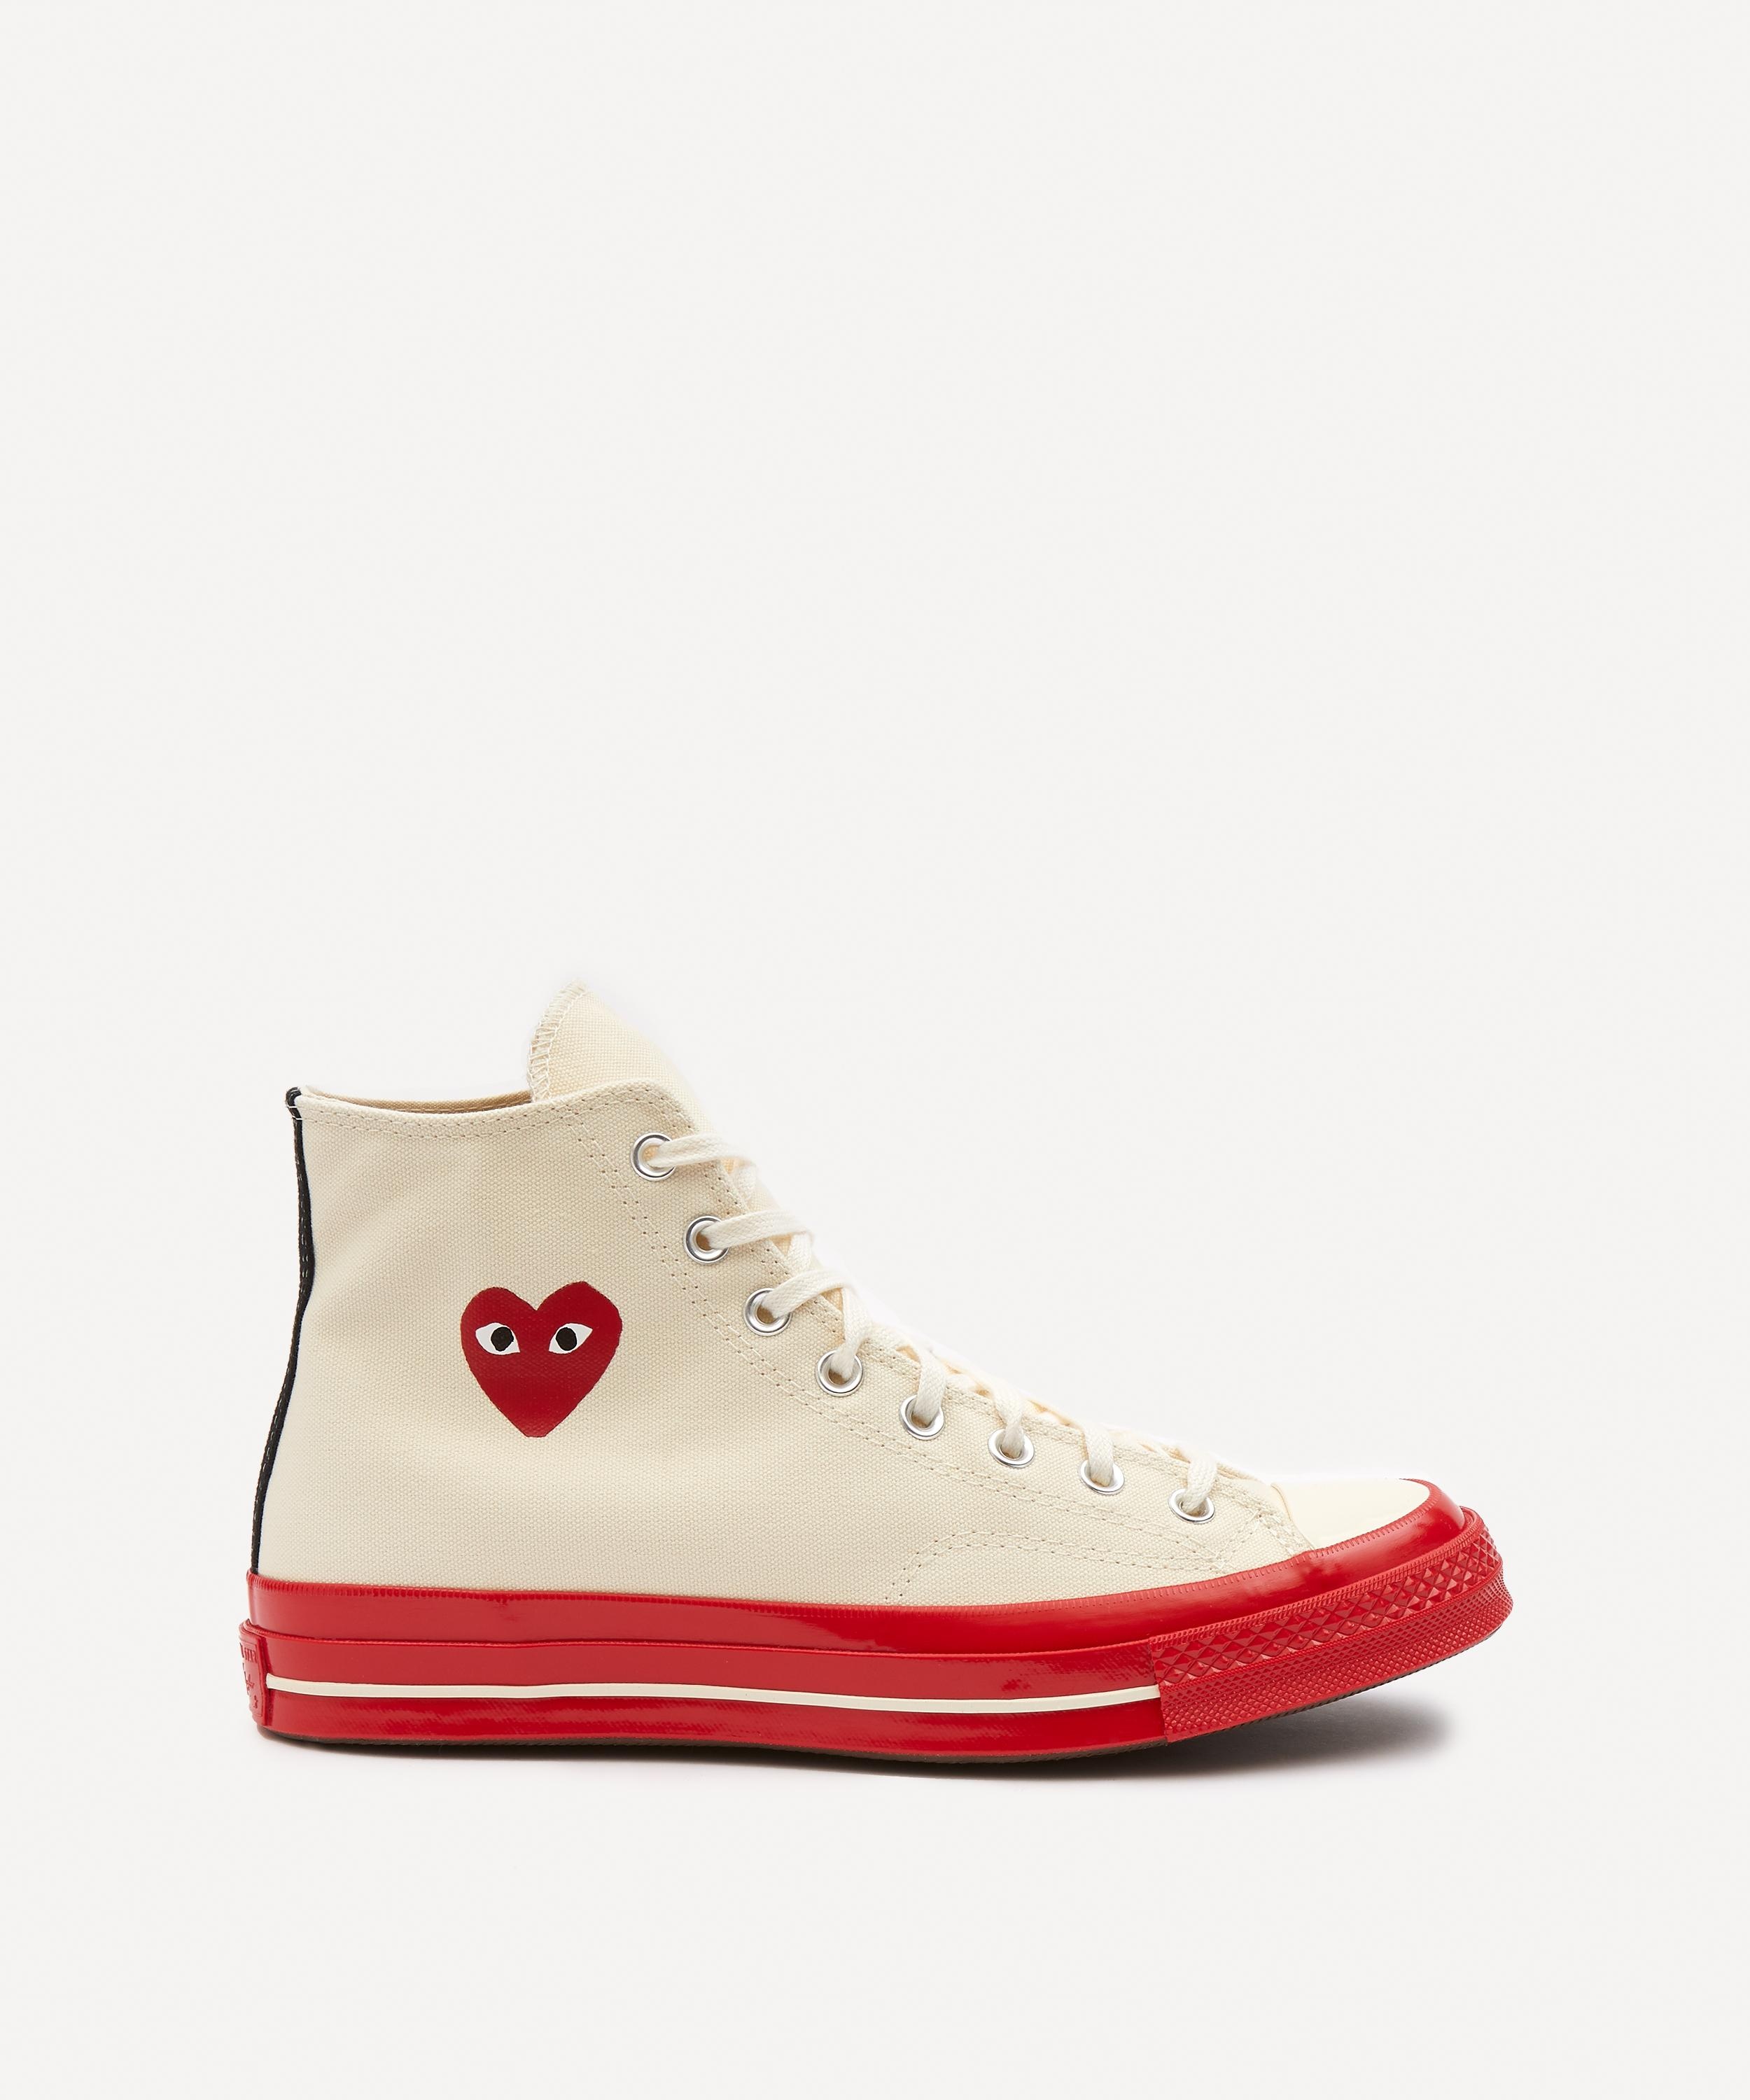 x Converse 70s Hi-Top Red Sole Canvas Trainers - 6